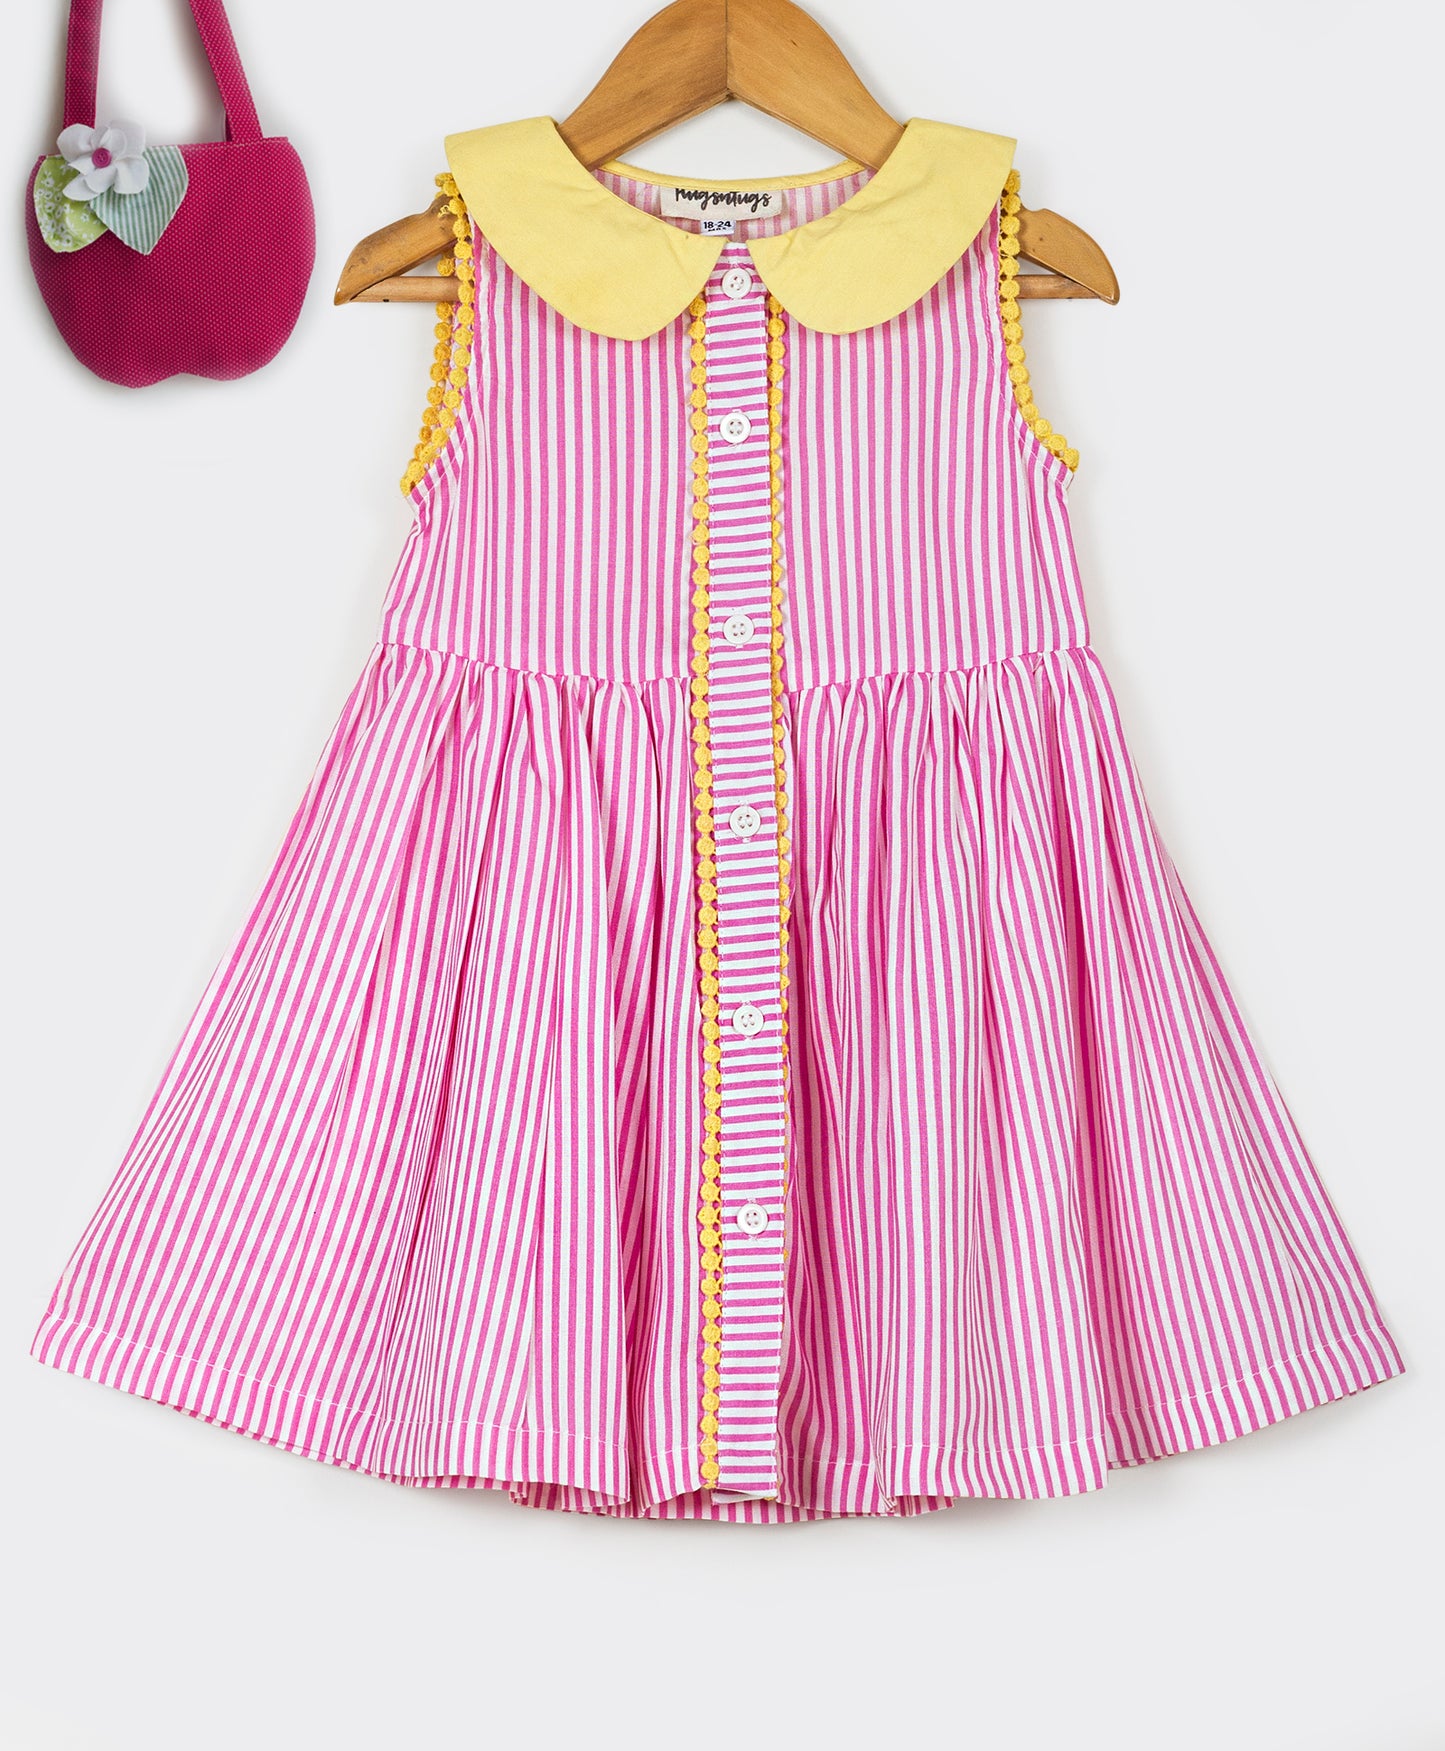 Stripe print dress with contrast collars